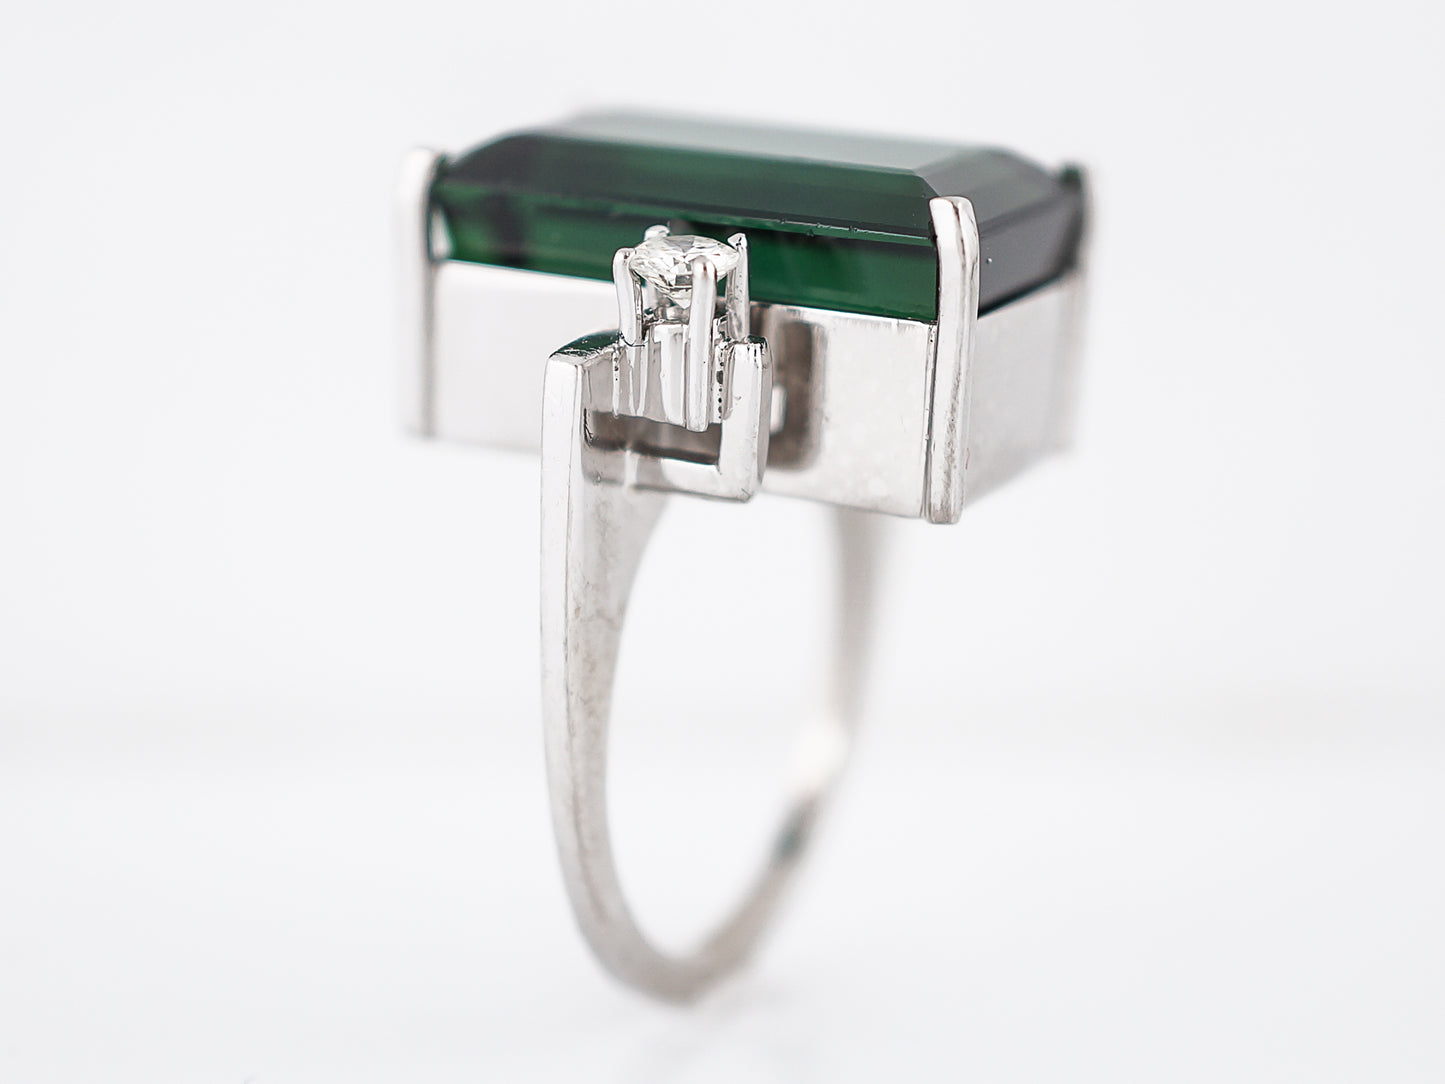 Vintage Cocktail Ring Mid-Century 12.91 Rectangle Cut Chrome Tourmaline in 14k White Gold